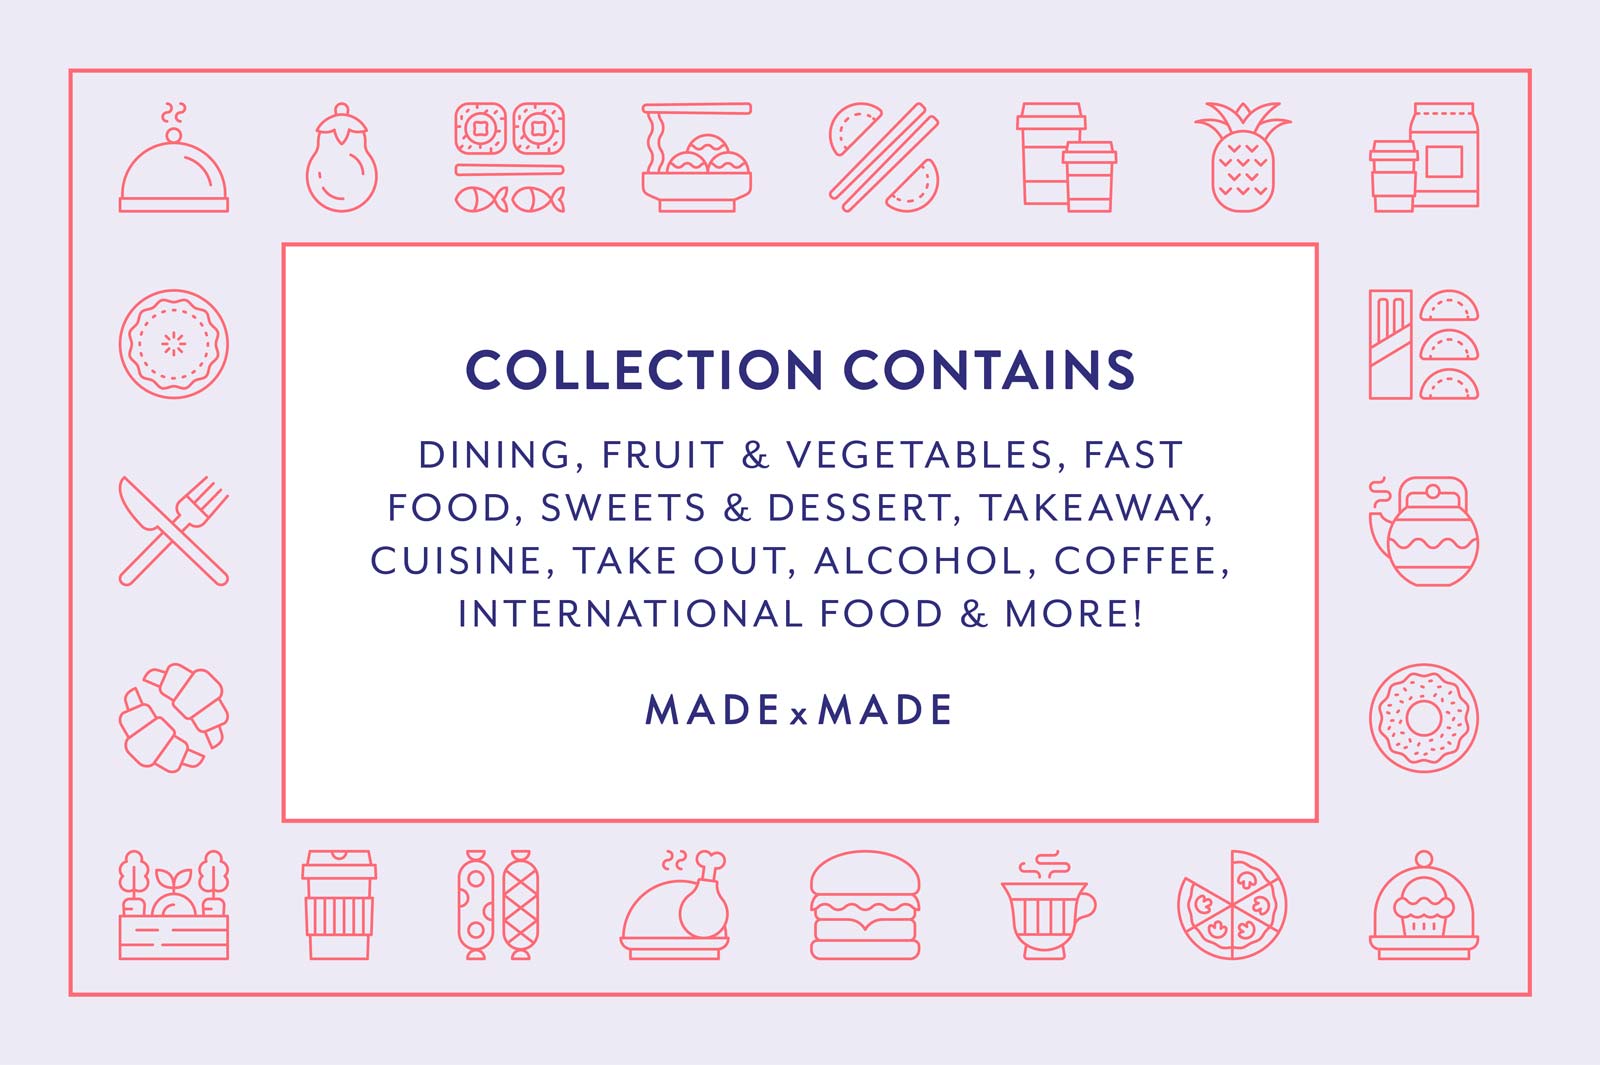 made x made icons food & drink cover – consistent icons for fast food, takeaway, coffee, alcohol, cuisine, breakfast, lunch, dinner - collection contains